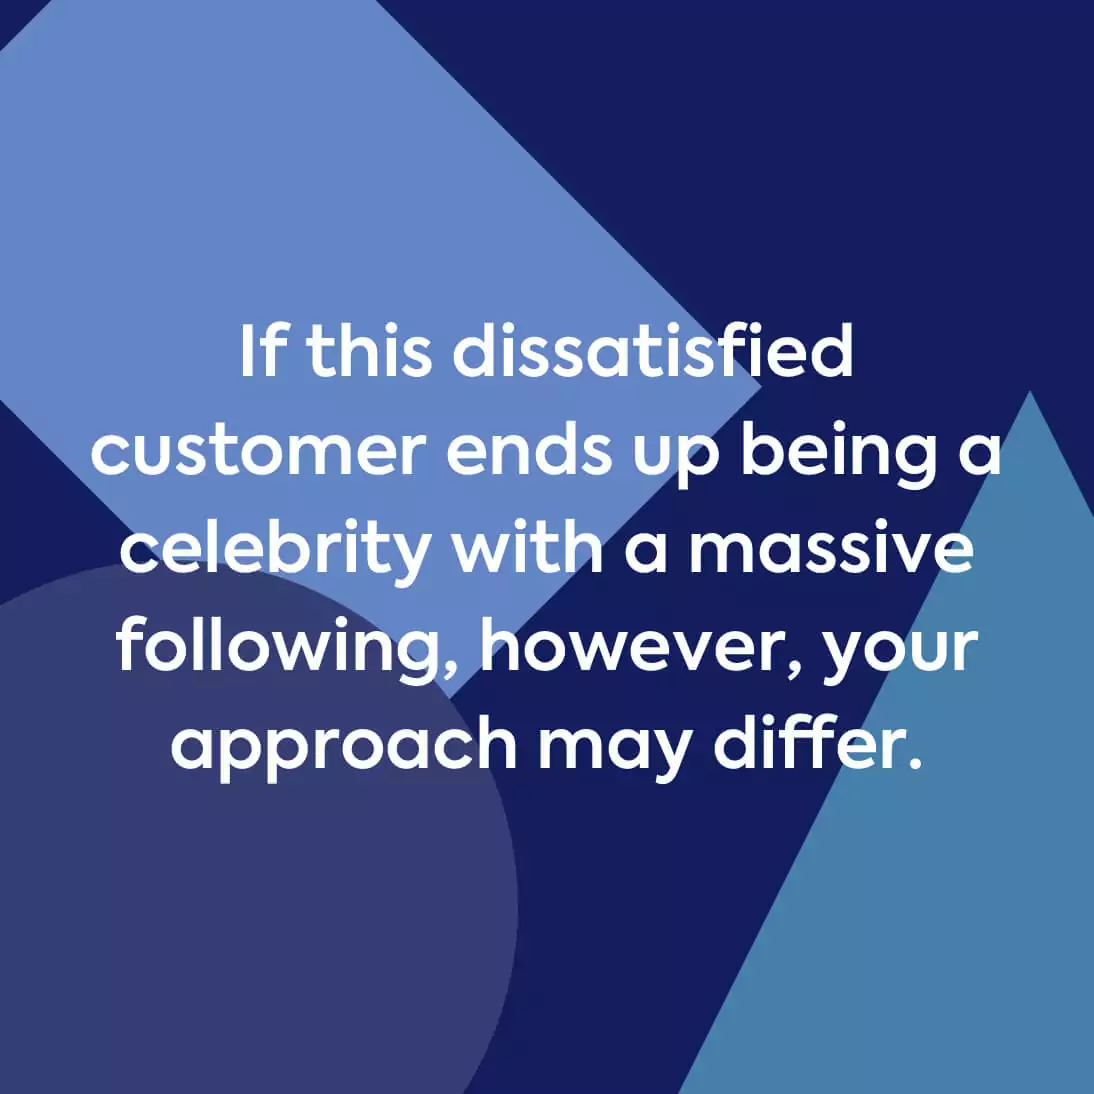 If a dissatisfied customer ends up being a celebrity with a massive following,.